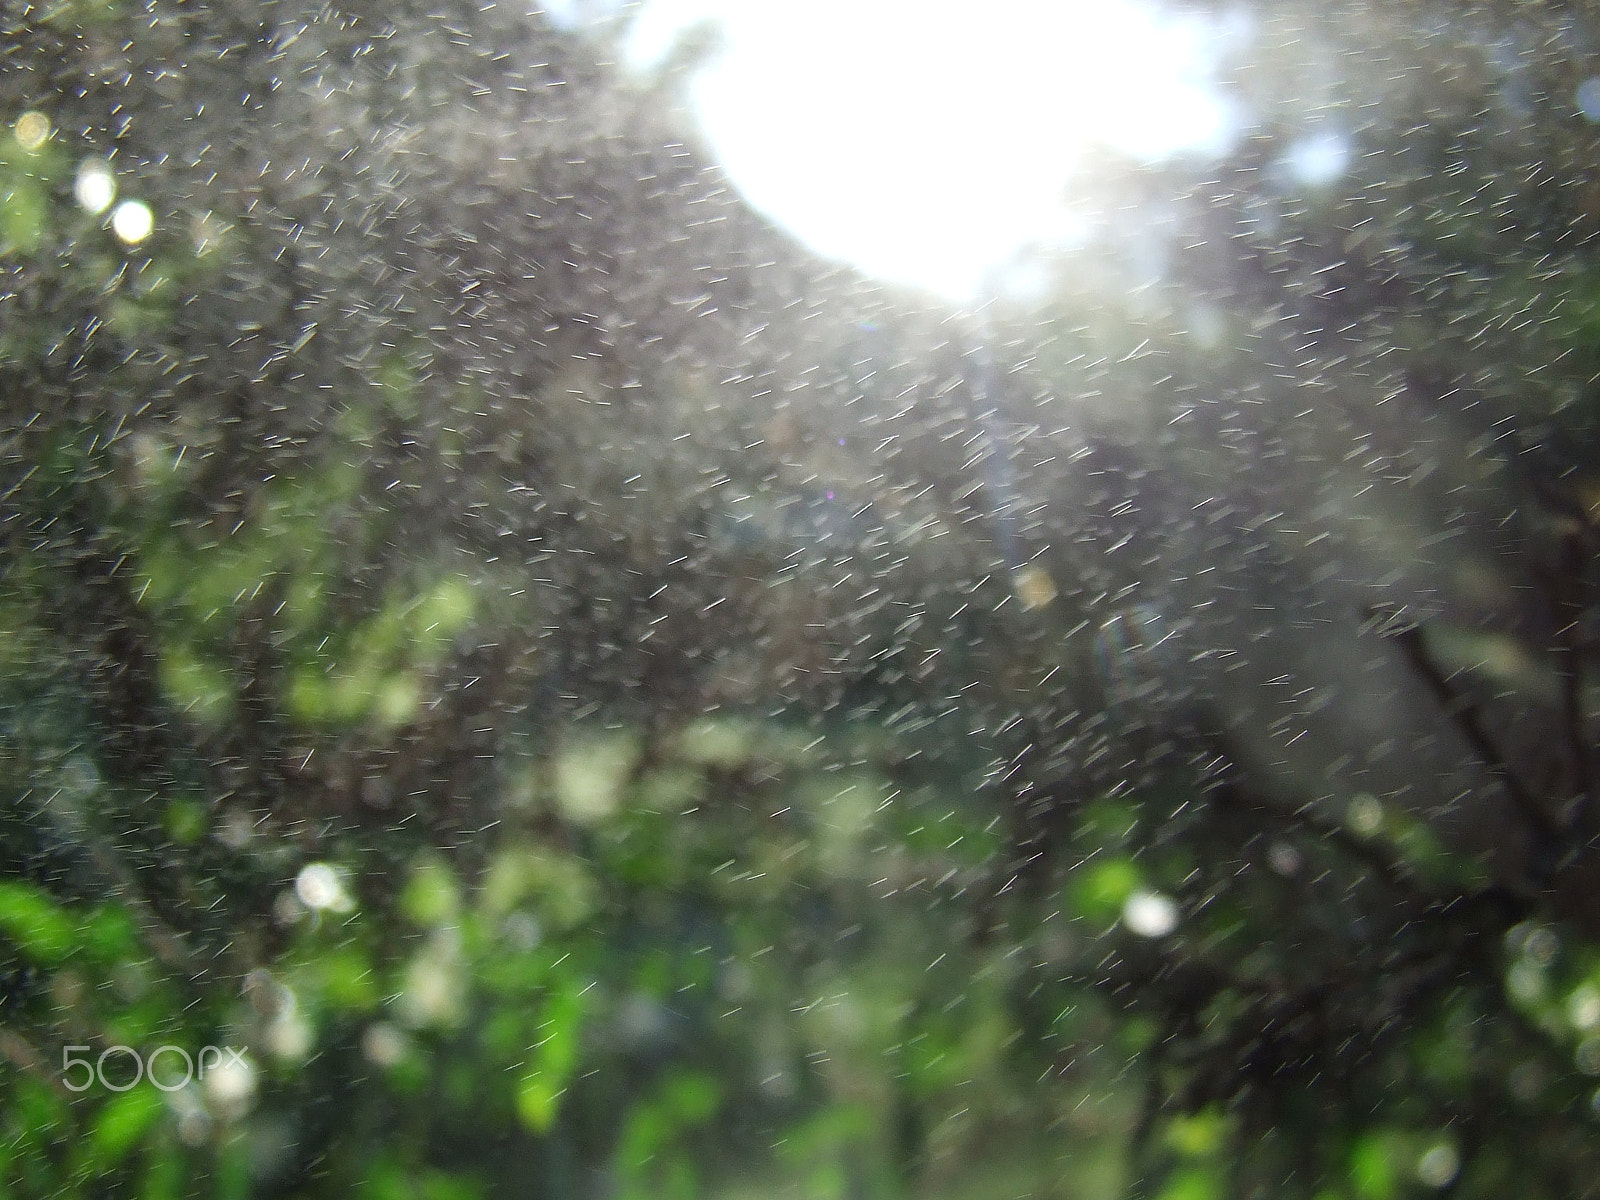 Fujifilm FinePix S5600 sample photo. Light catching on water particles photography